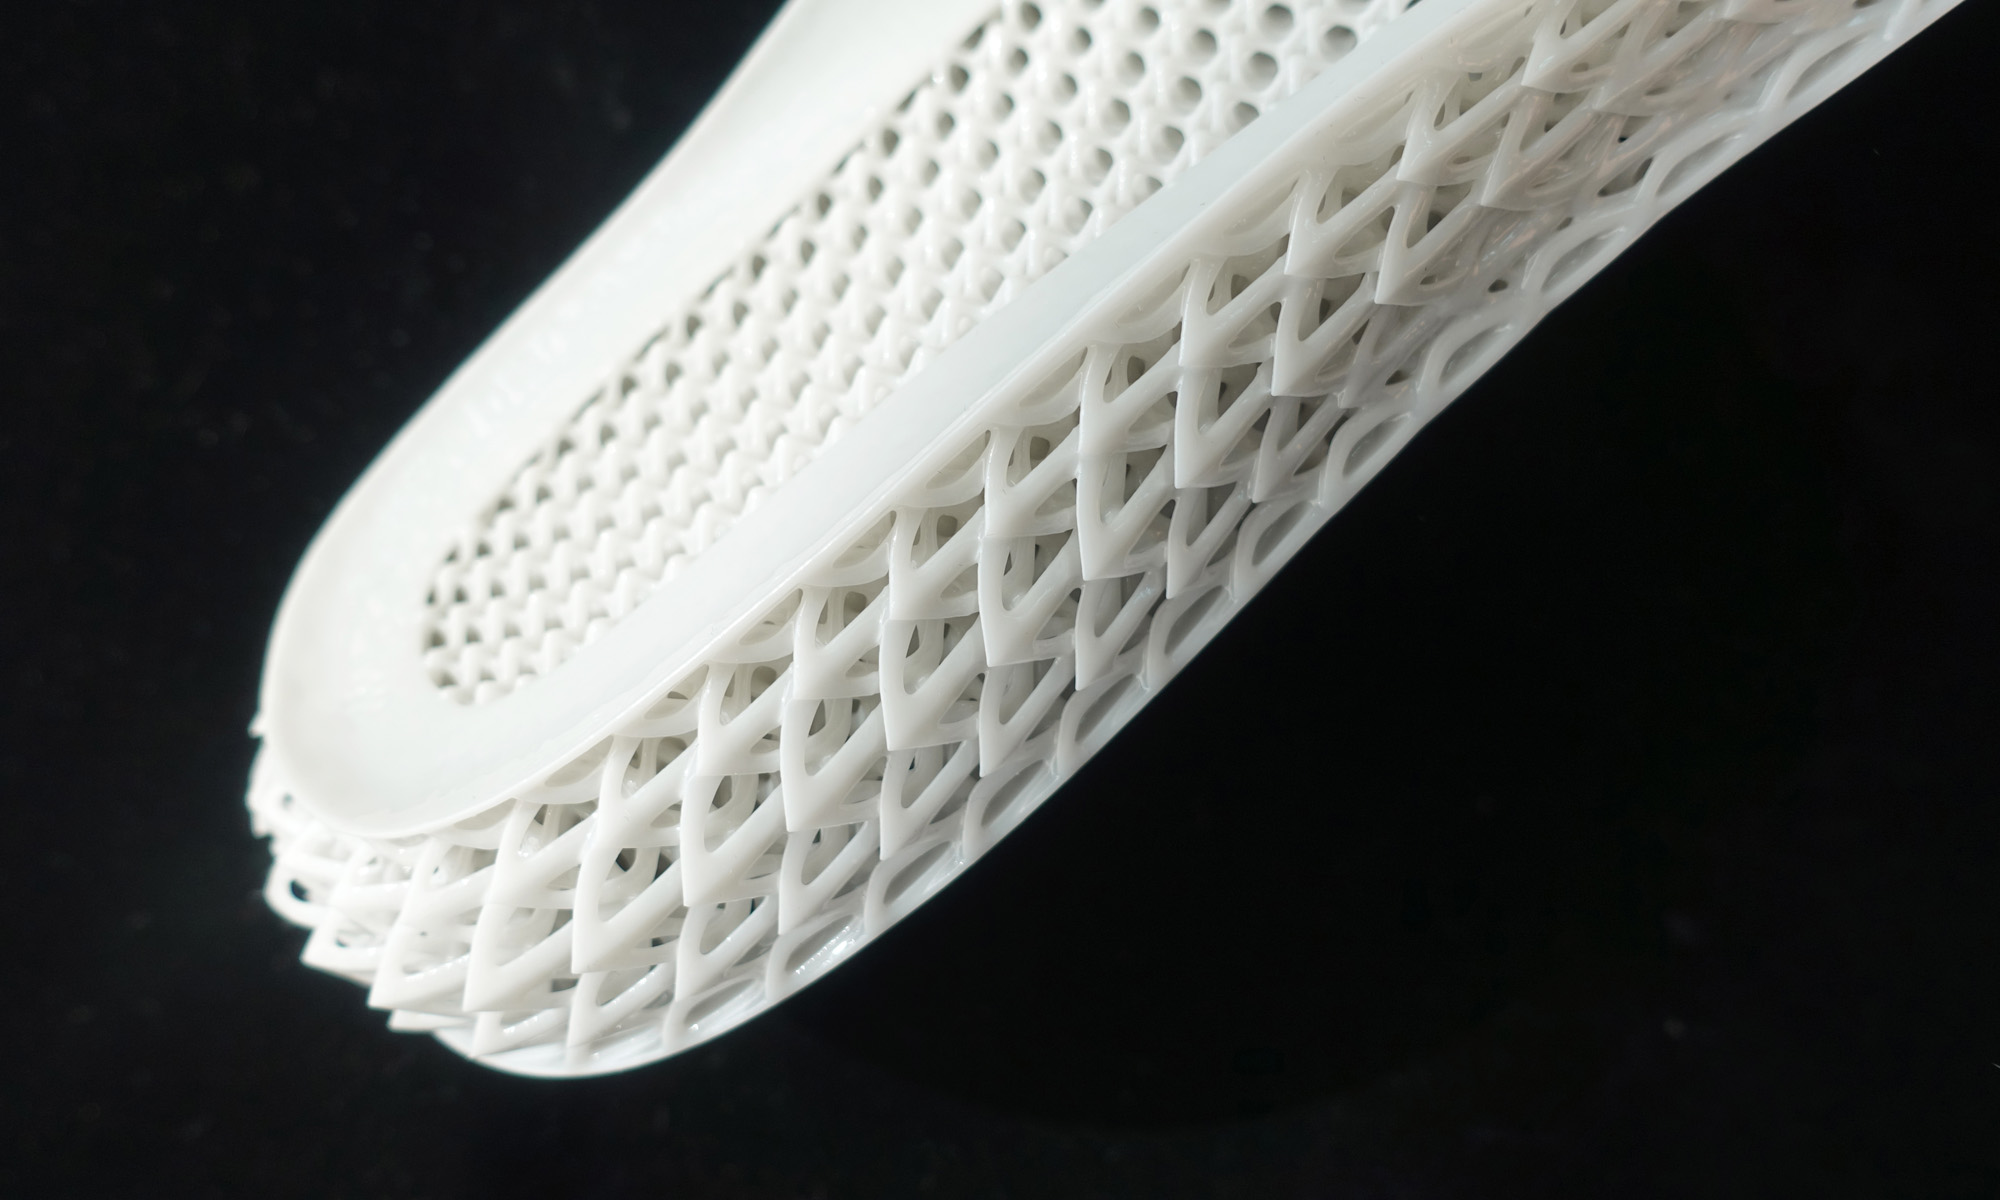 DLP 3D Printed Midsole With Dragon-scale Pattern Using Rubber-like ...